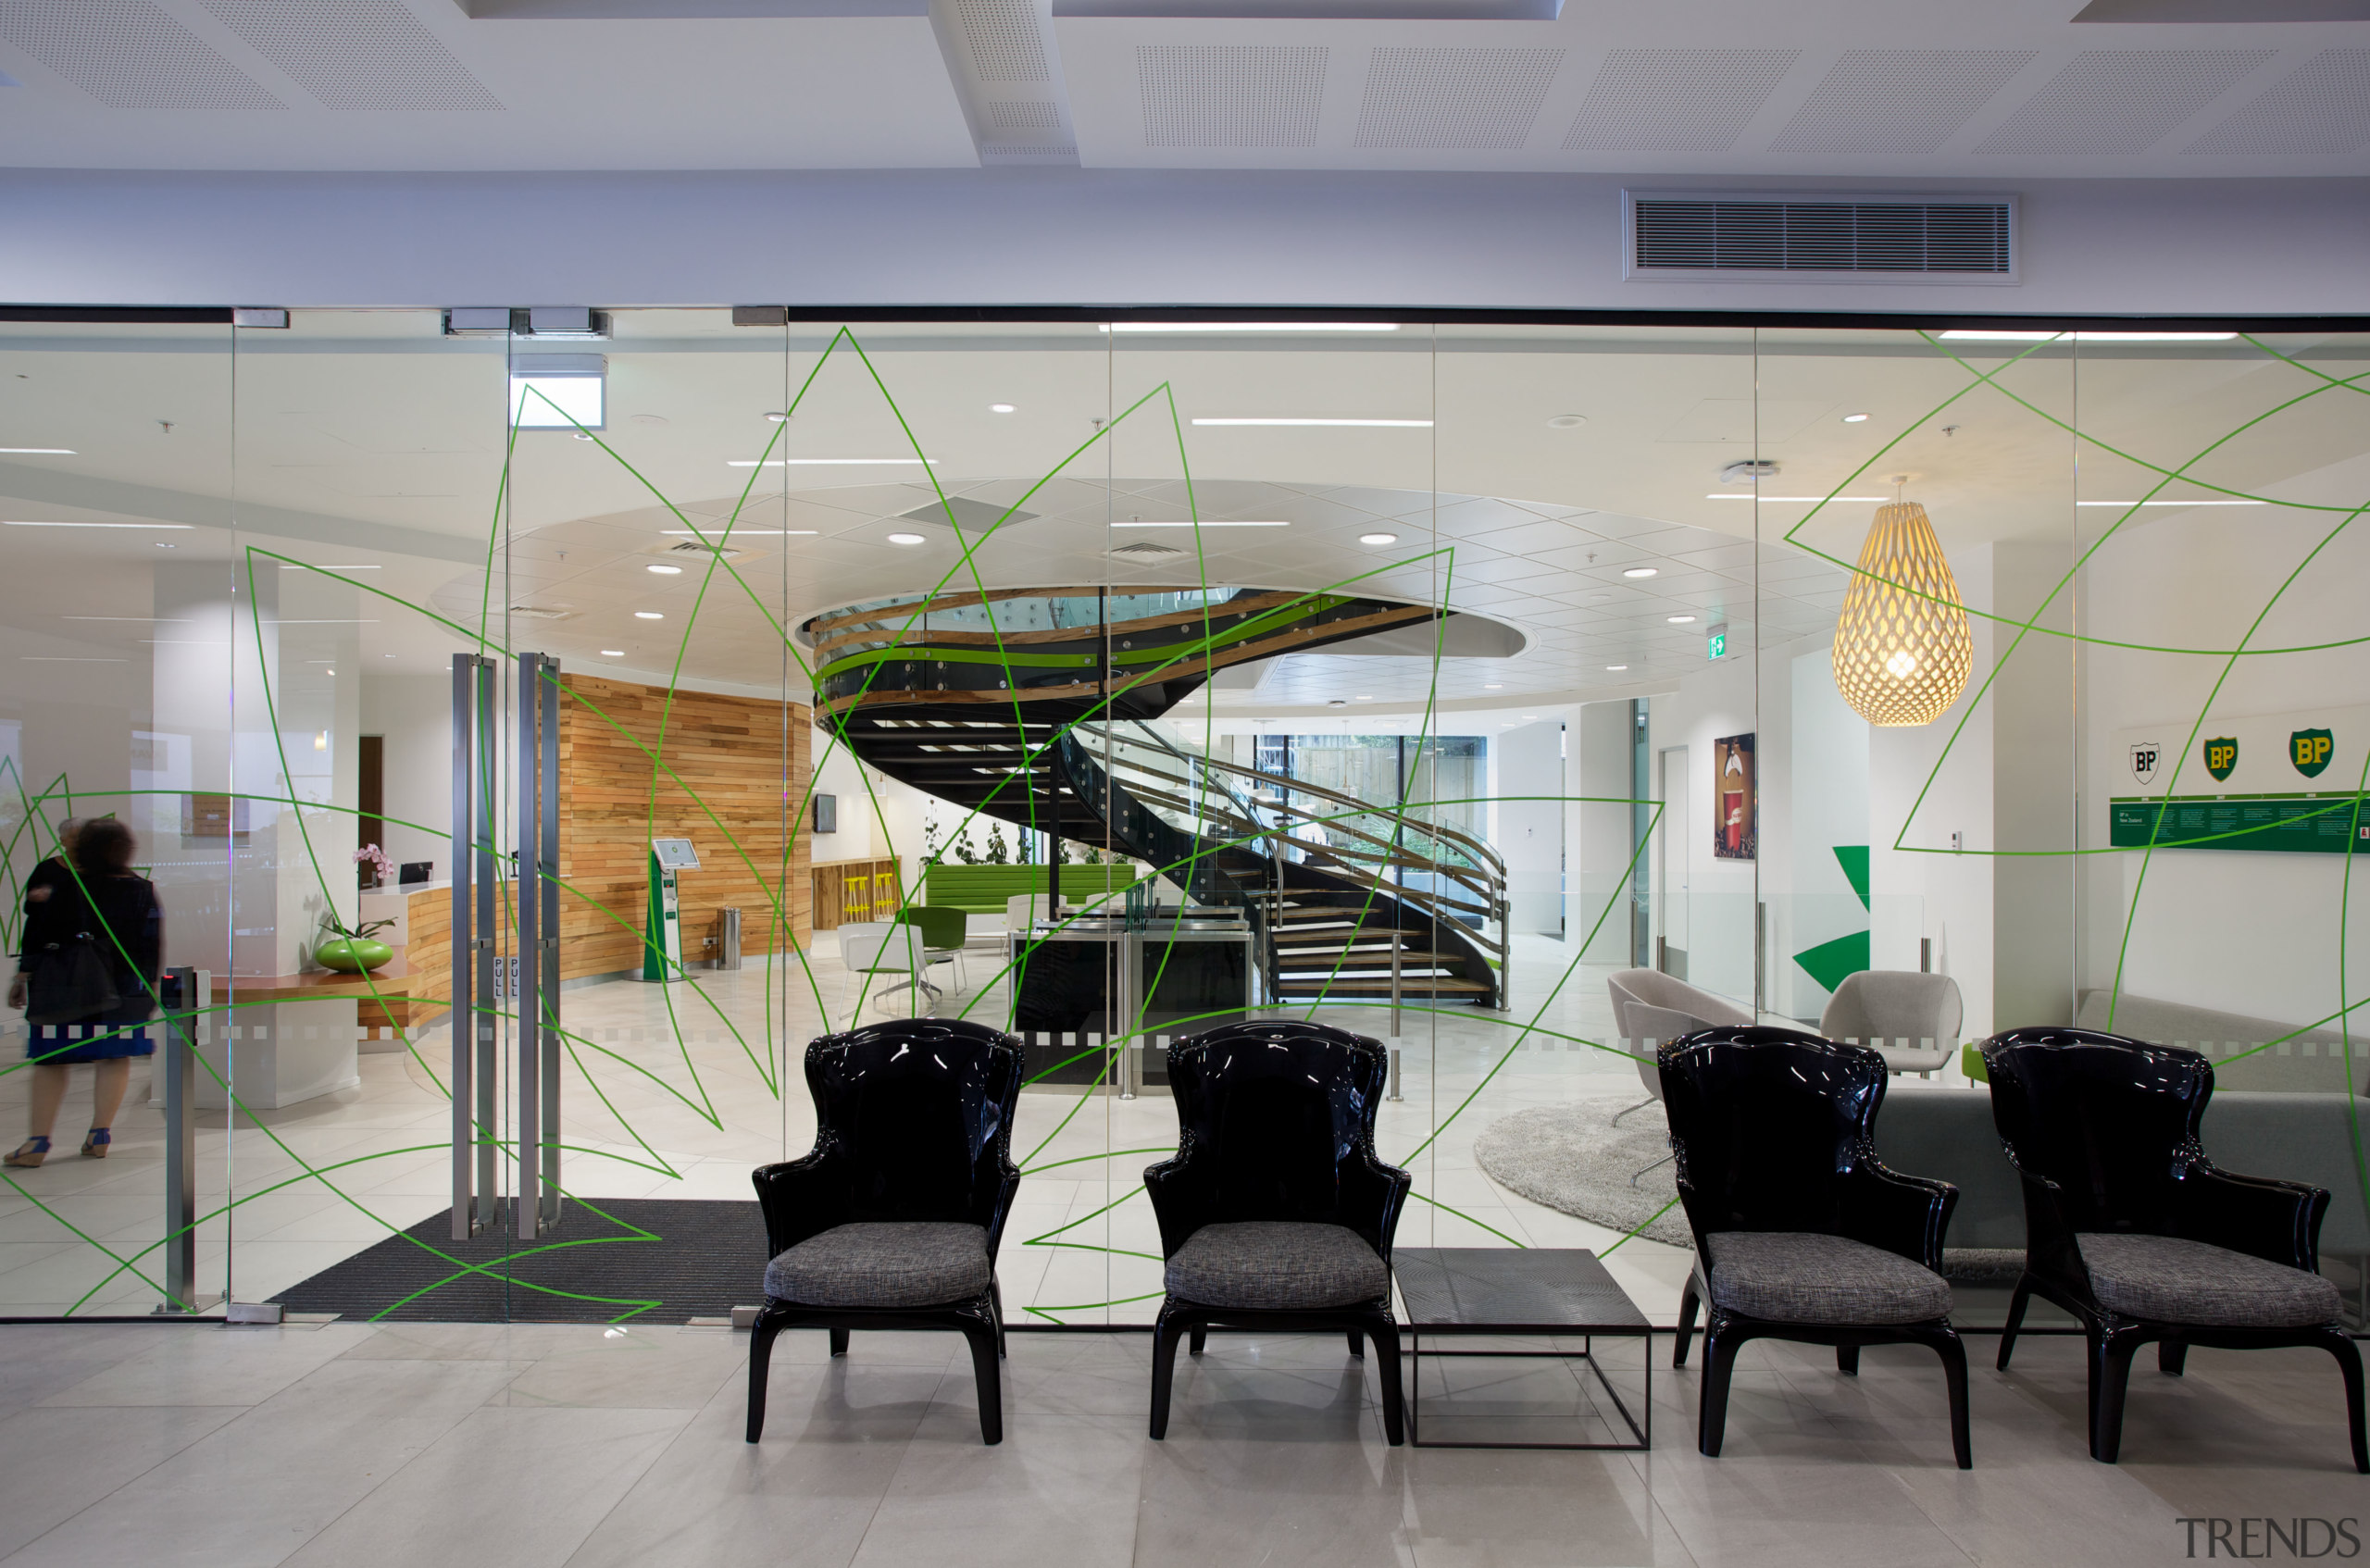 Green graphics on the glass walls of the ceiling, glass, interior design, lobby, gray